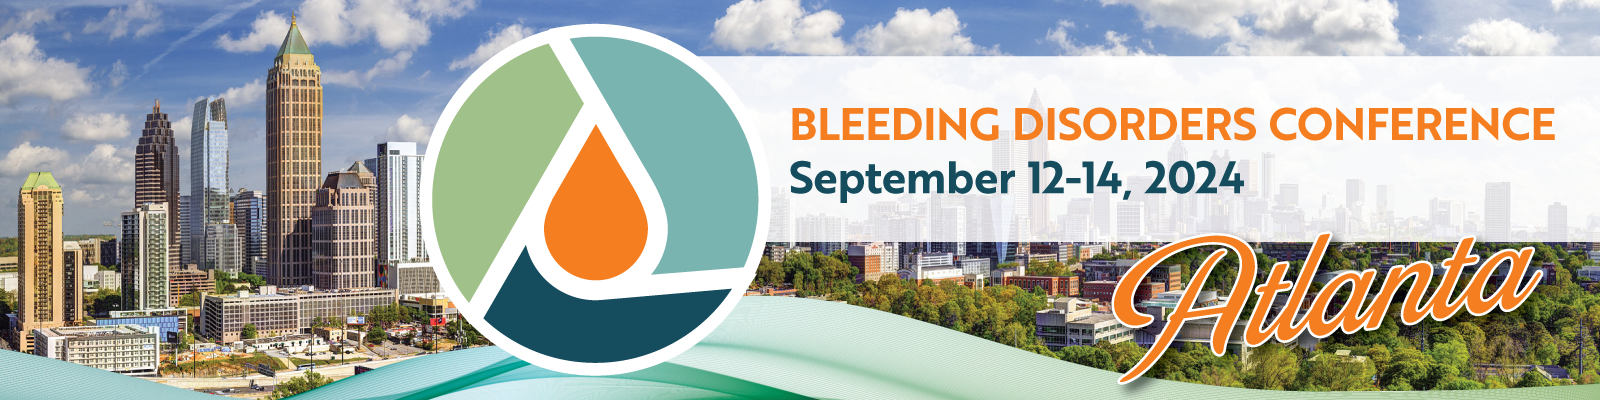 76th Bleeding Disorders Conference 2024